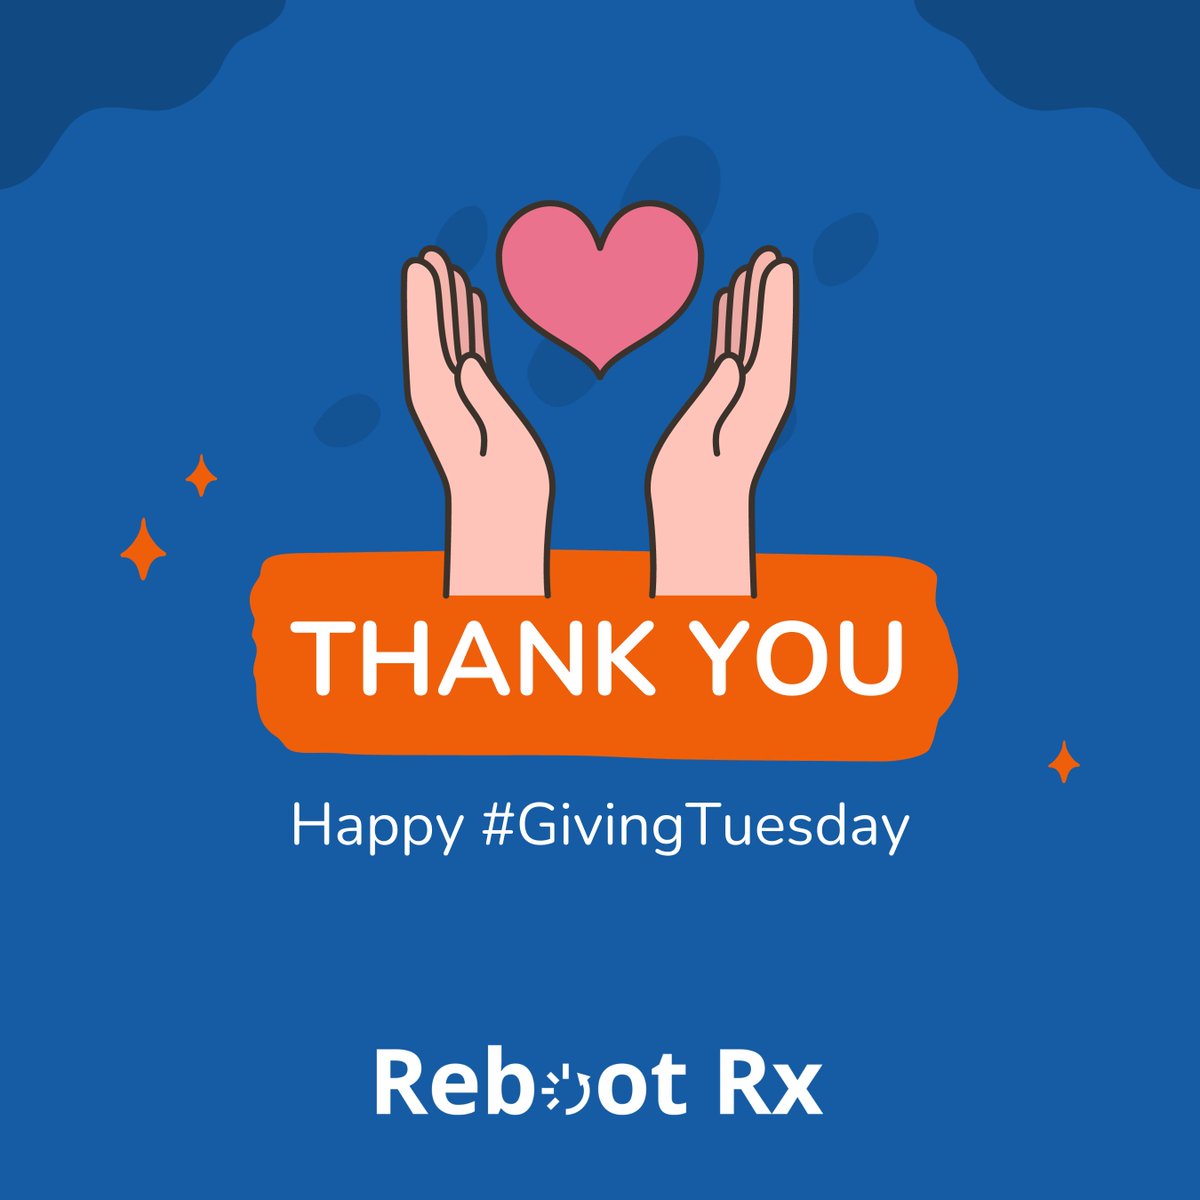 We imagine a world where everyone has access to affordable #cancer treatments. This #GivingTuesday, we want to extend our heartfelt thanks to the incredible people who make our mission possible. You can help us reach our next milestones with a donation at rebootrx.org/donate.